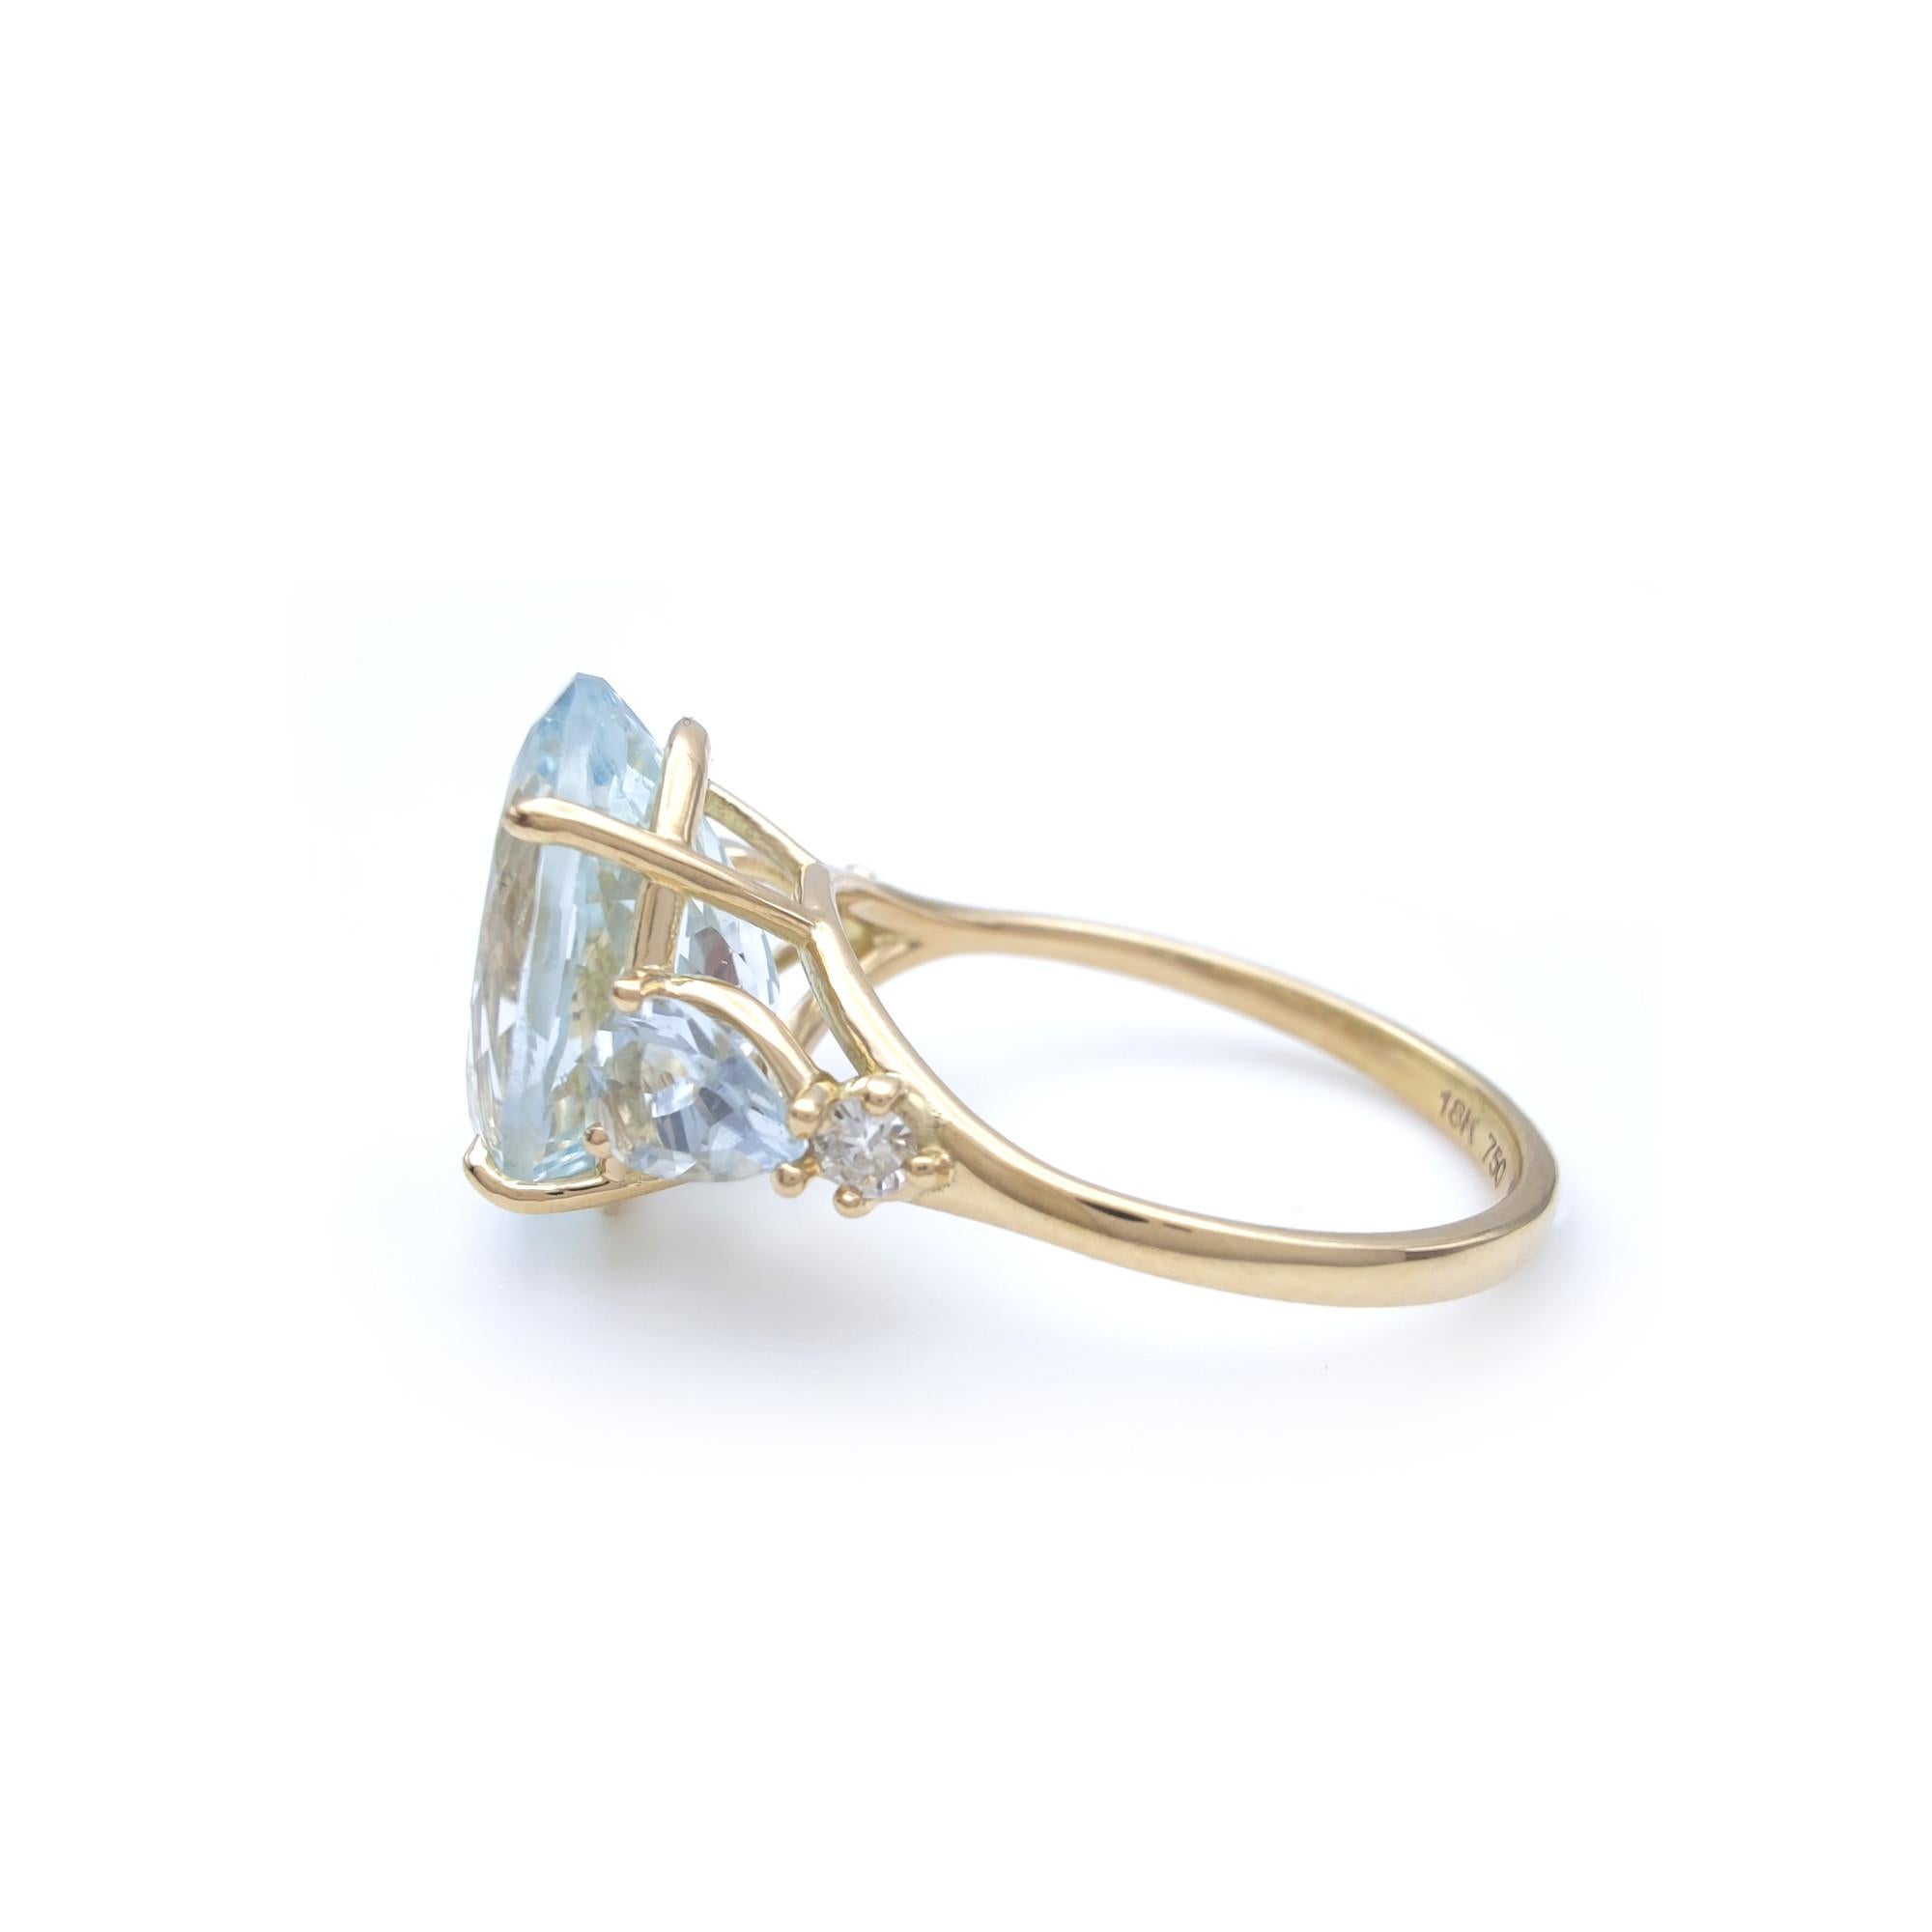 4.3ct  Oval Cut  Aquamarine  Ring, 18k Yellow Gold, with diamonds  For Sale 3